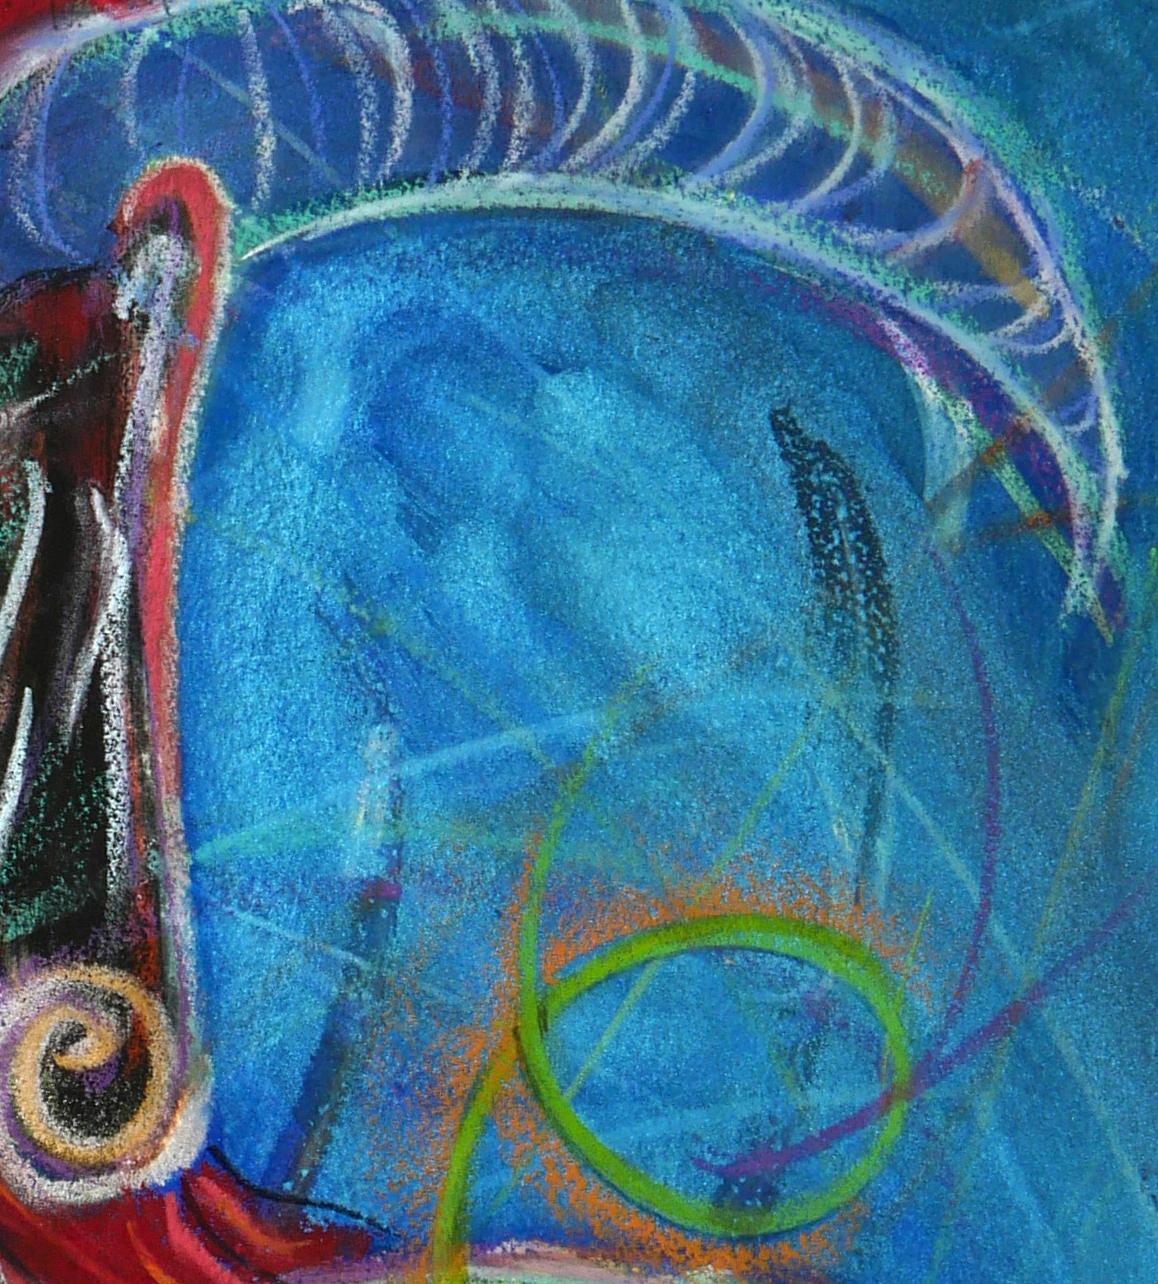 Horned and Read, colorful mythological figure, spiritual, blue ground - Expressionist Painting by Janet Morgan